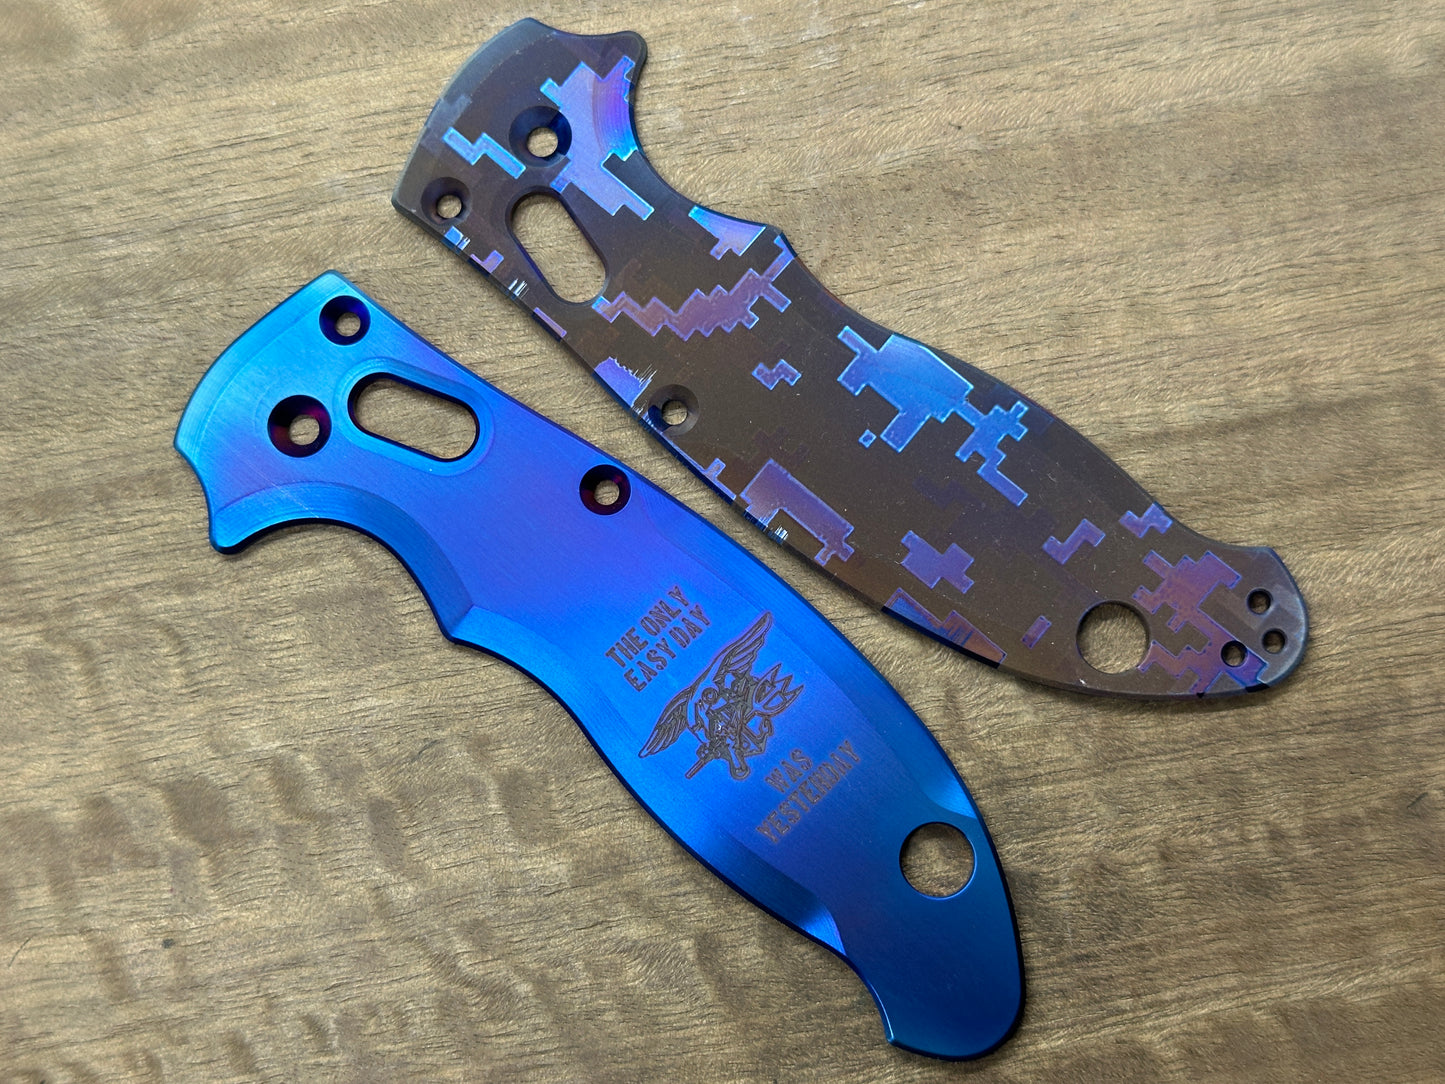 US NAVY Seals The only easy day was yesterday Flamed Titanium scales for Spyderco MANIX 2